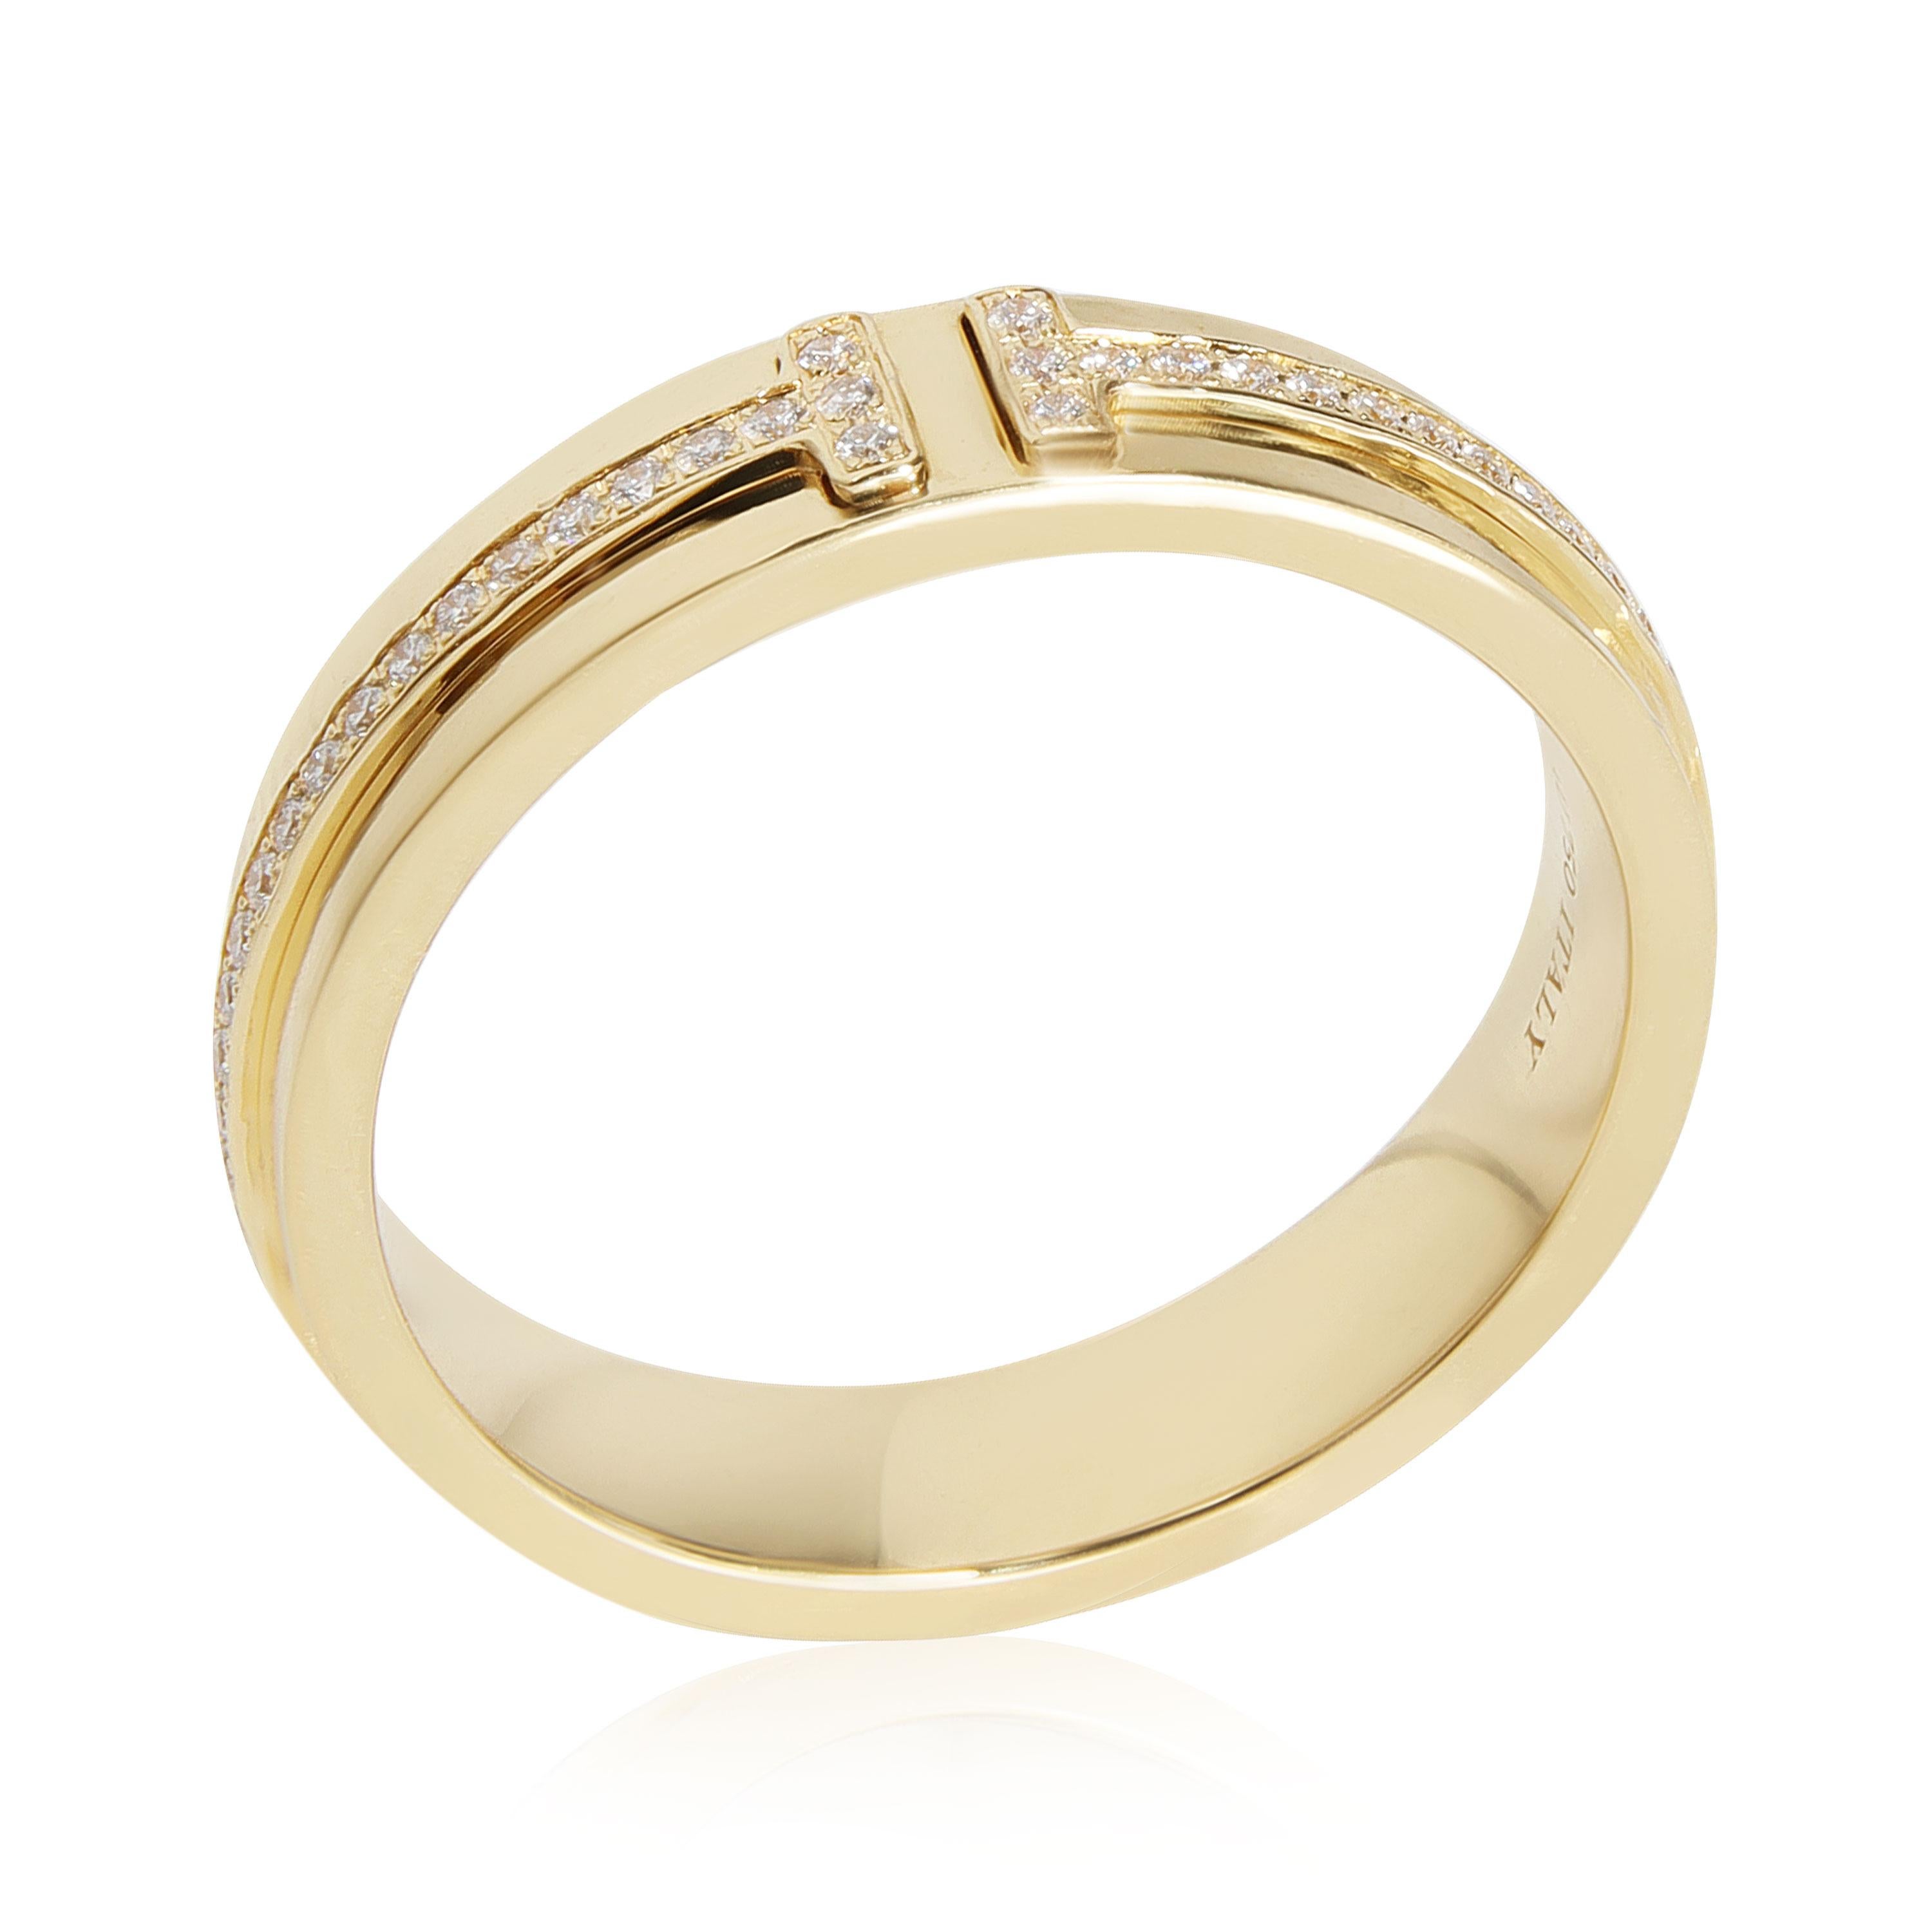 Tiffany & Co. Narrow Tiffany T Diamond Band in 18k Yellow Gold 0.13 CTW

PRIMARY DETAILS
SKU: 113301
Listing Title: Tiffany & Co. Narrow Tiffany T Diamond Band in 18k Yellow Gold 0.13 CTW
Condition Description: Retails for 3,000 USD. In excellent